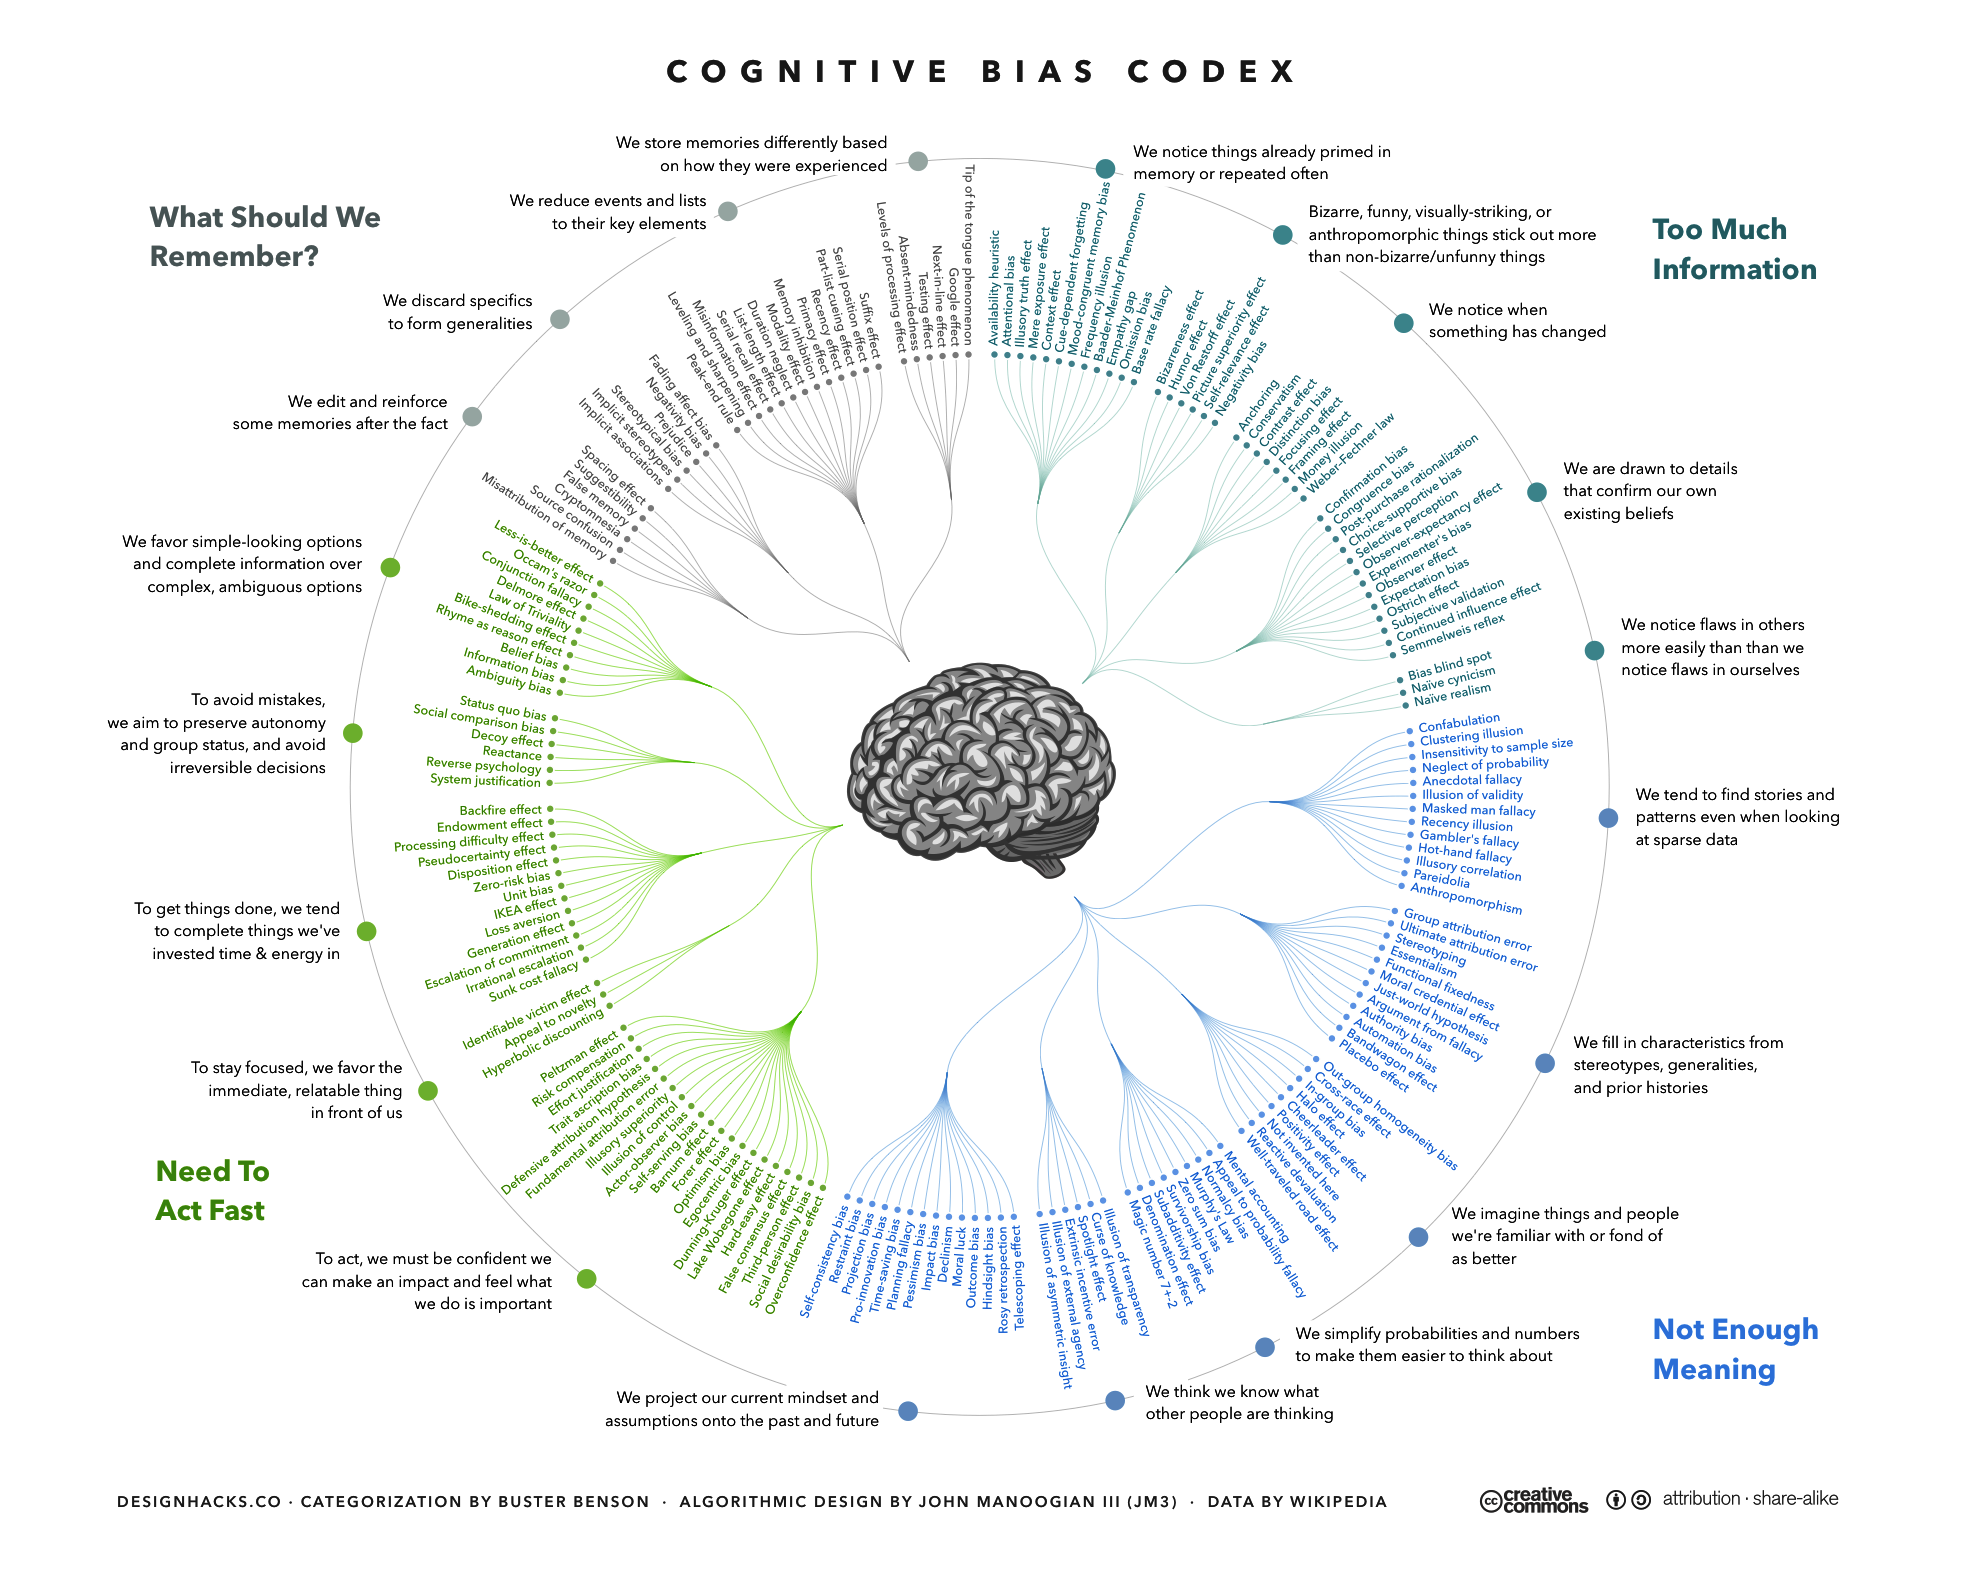 Cognitive Biases and Heuristics